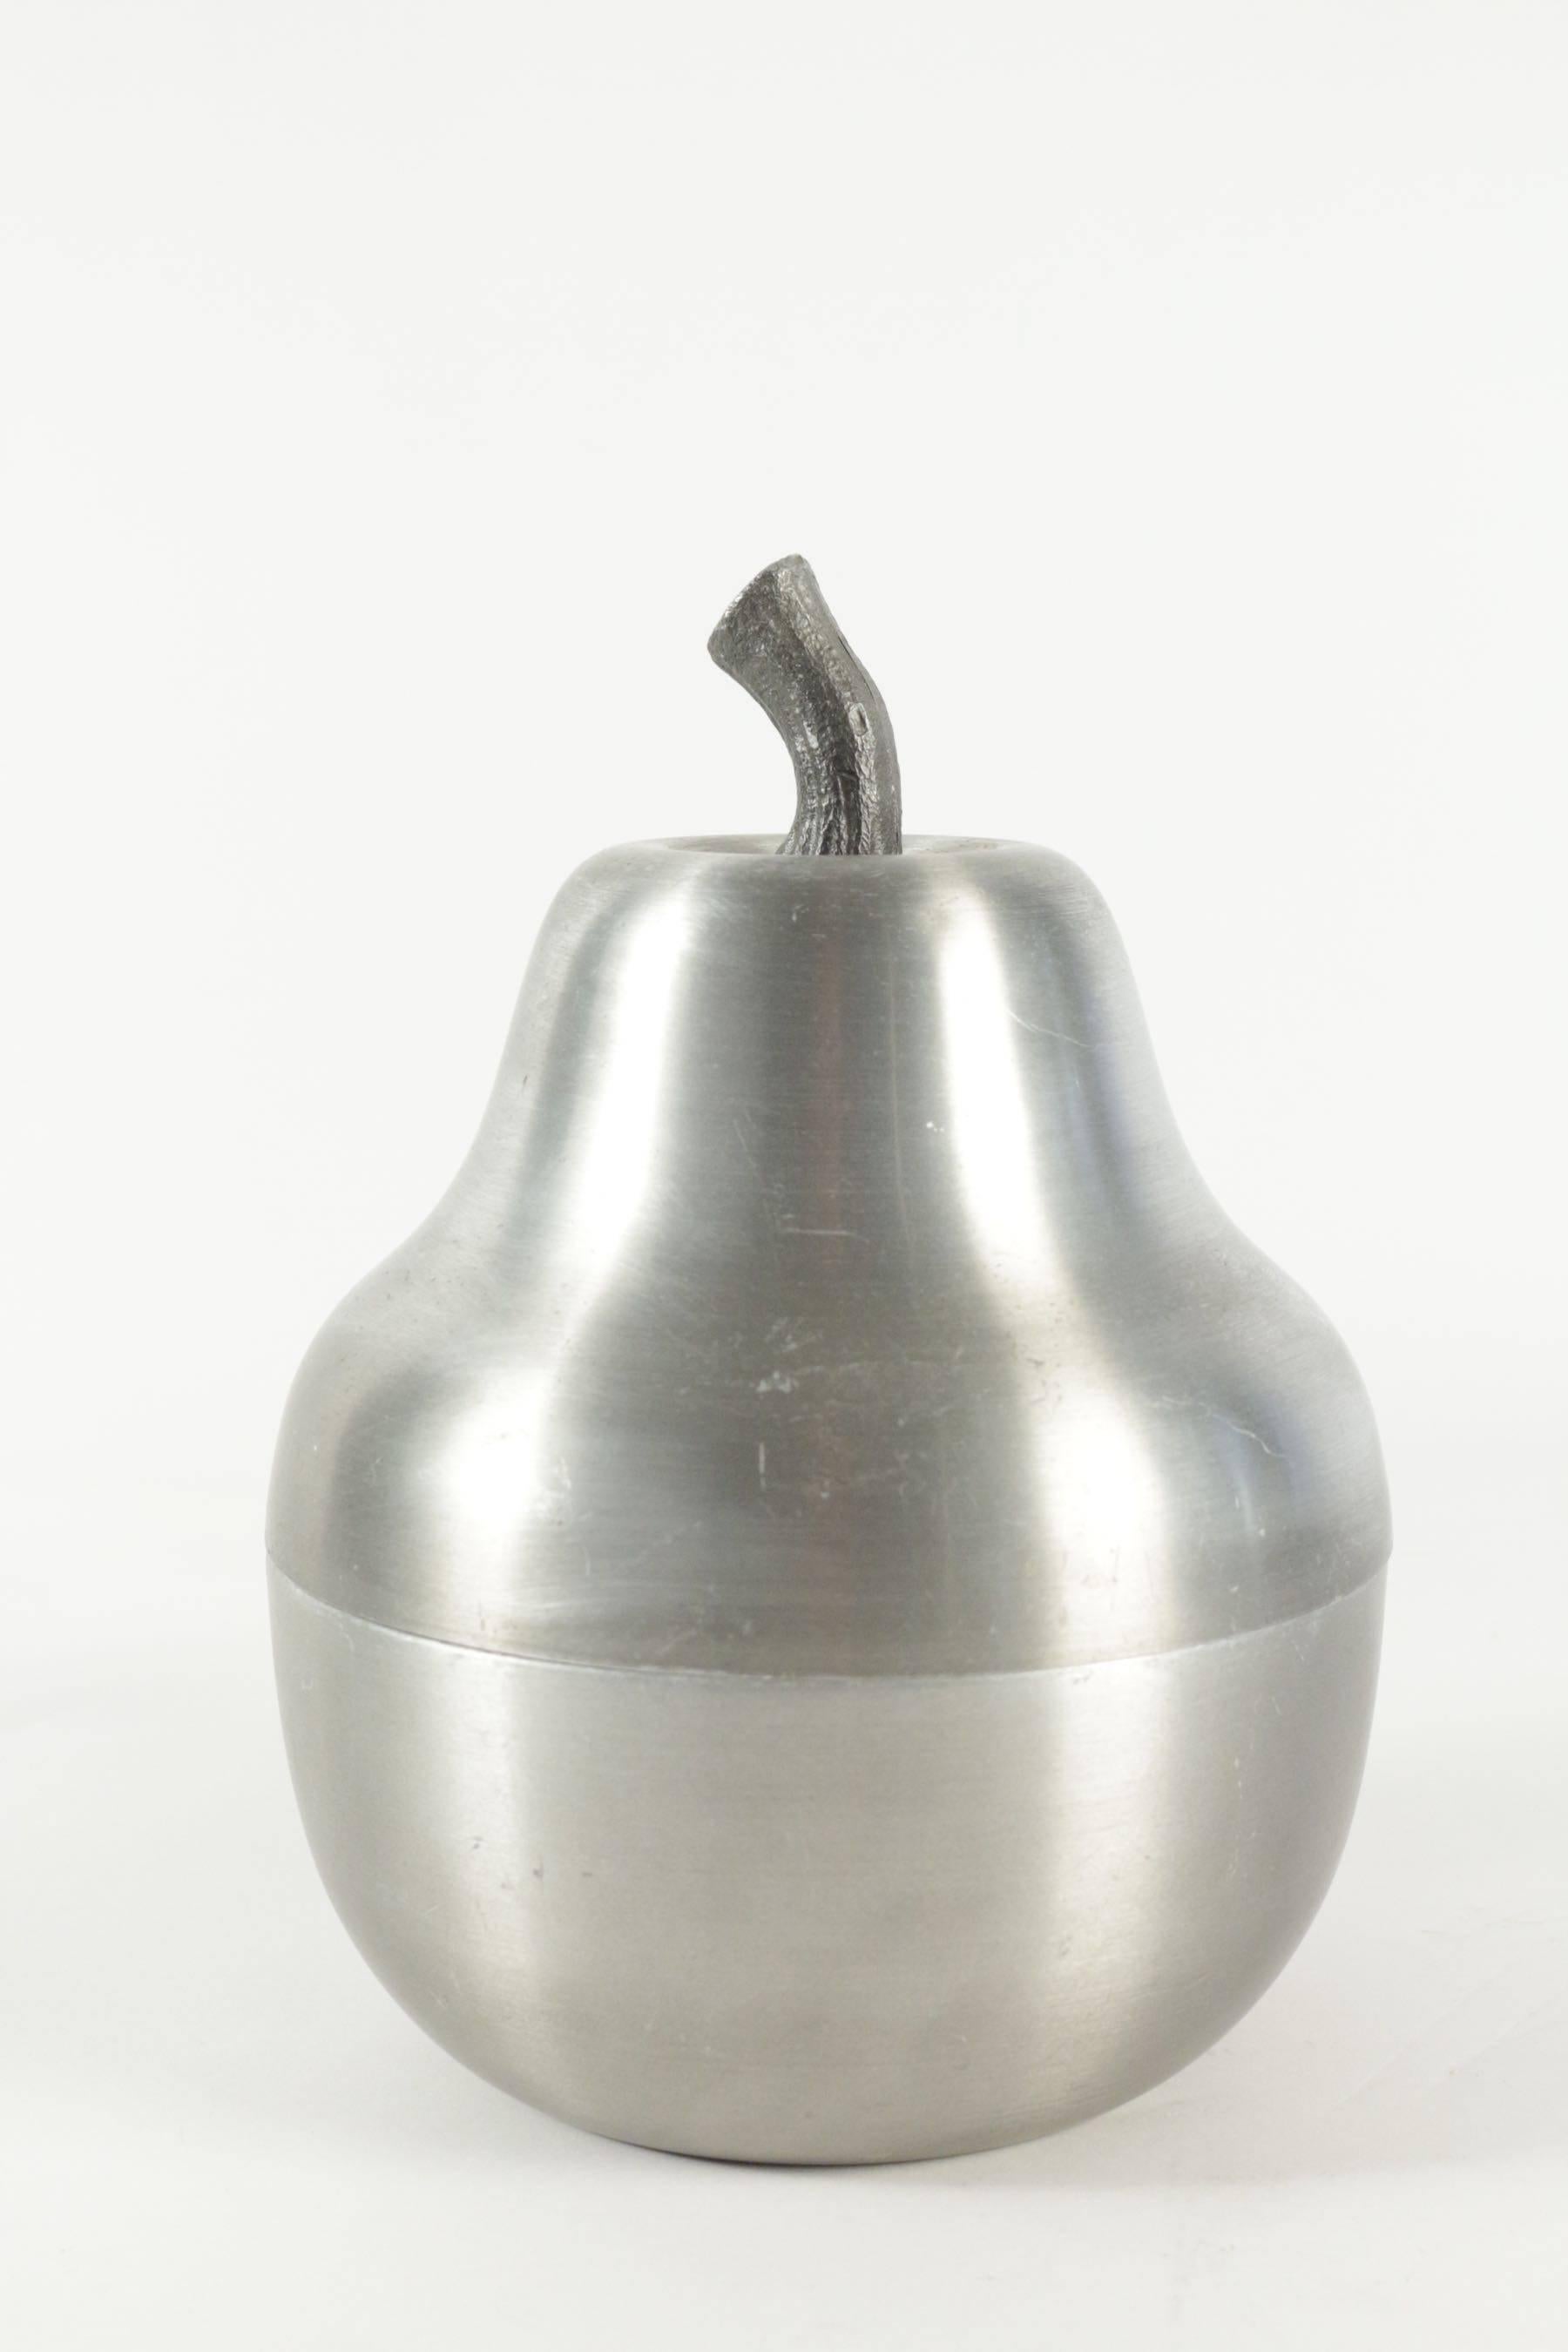 French Cool Ice Bucket in the Shape of a Pear in Brushed Aluminum from the 1970s For Sale